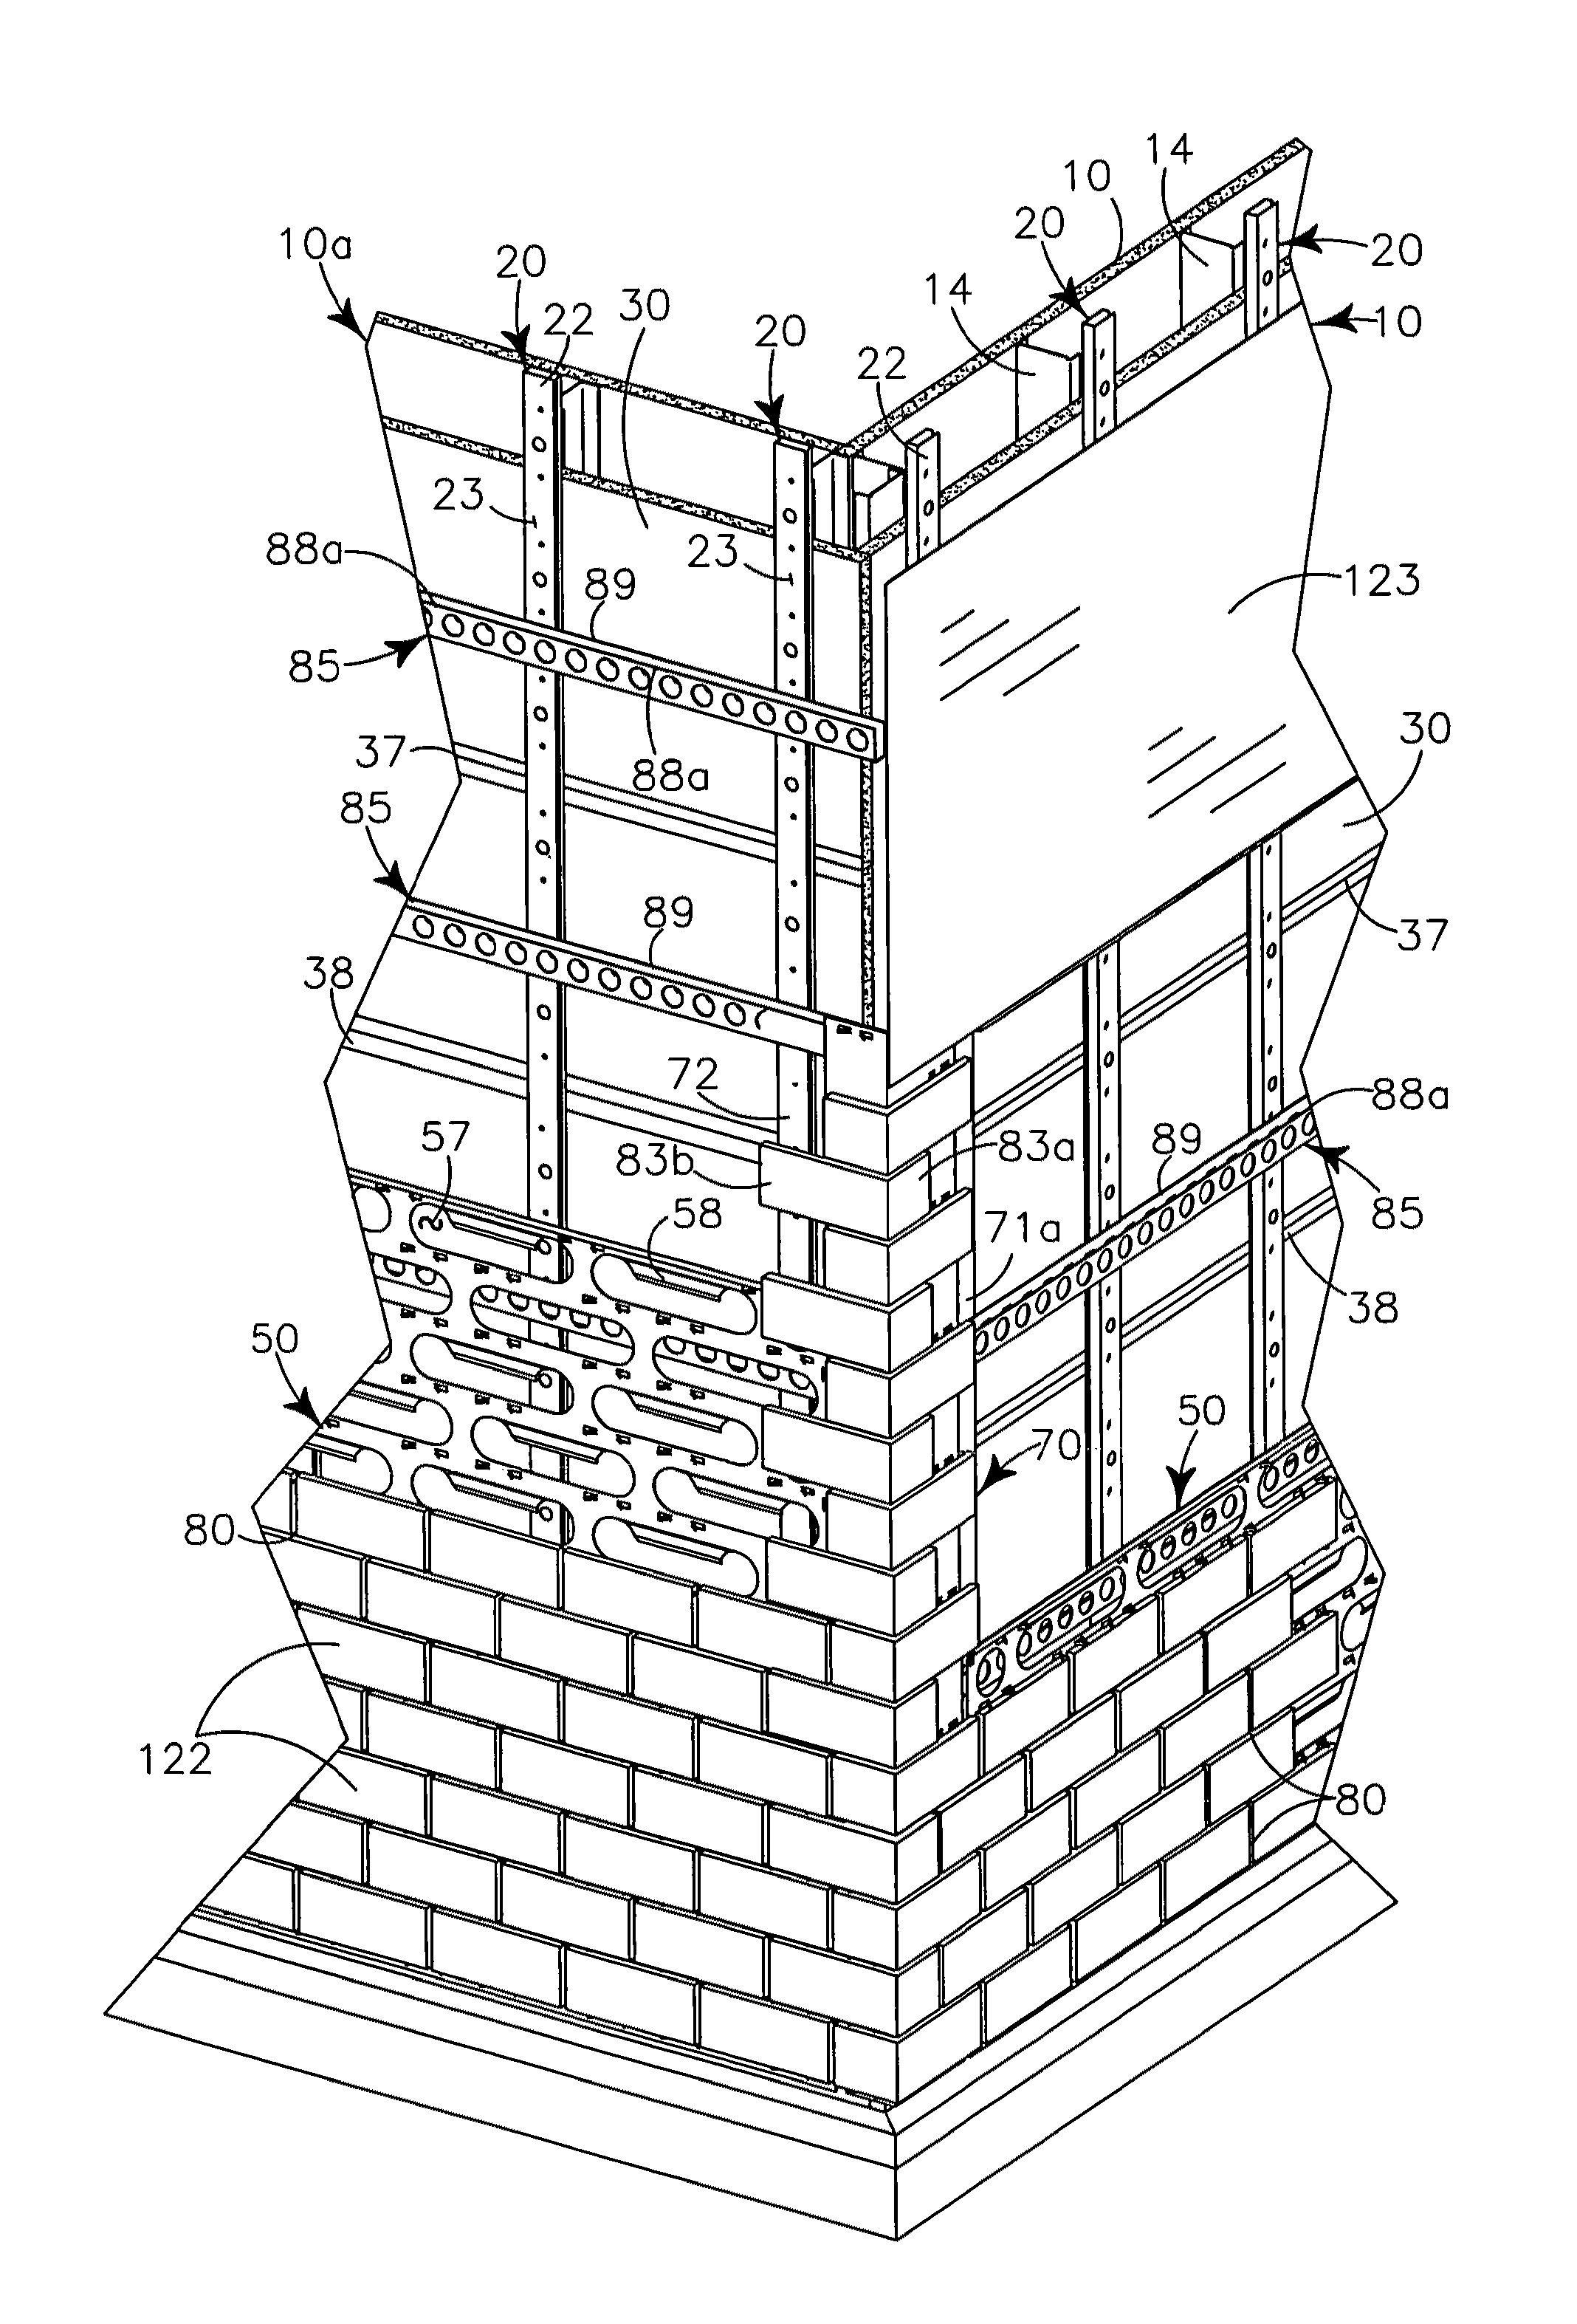 Modular system for cladding exterior walls of a structure and insulating the structure walls